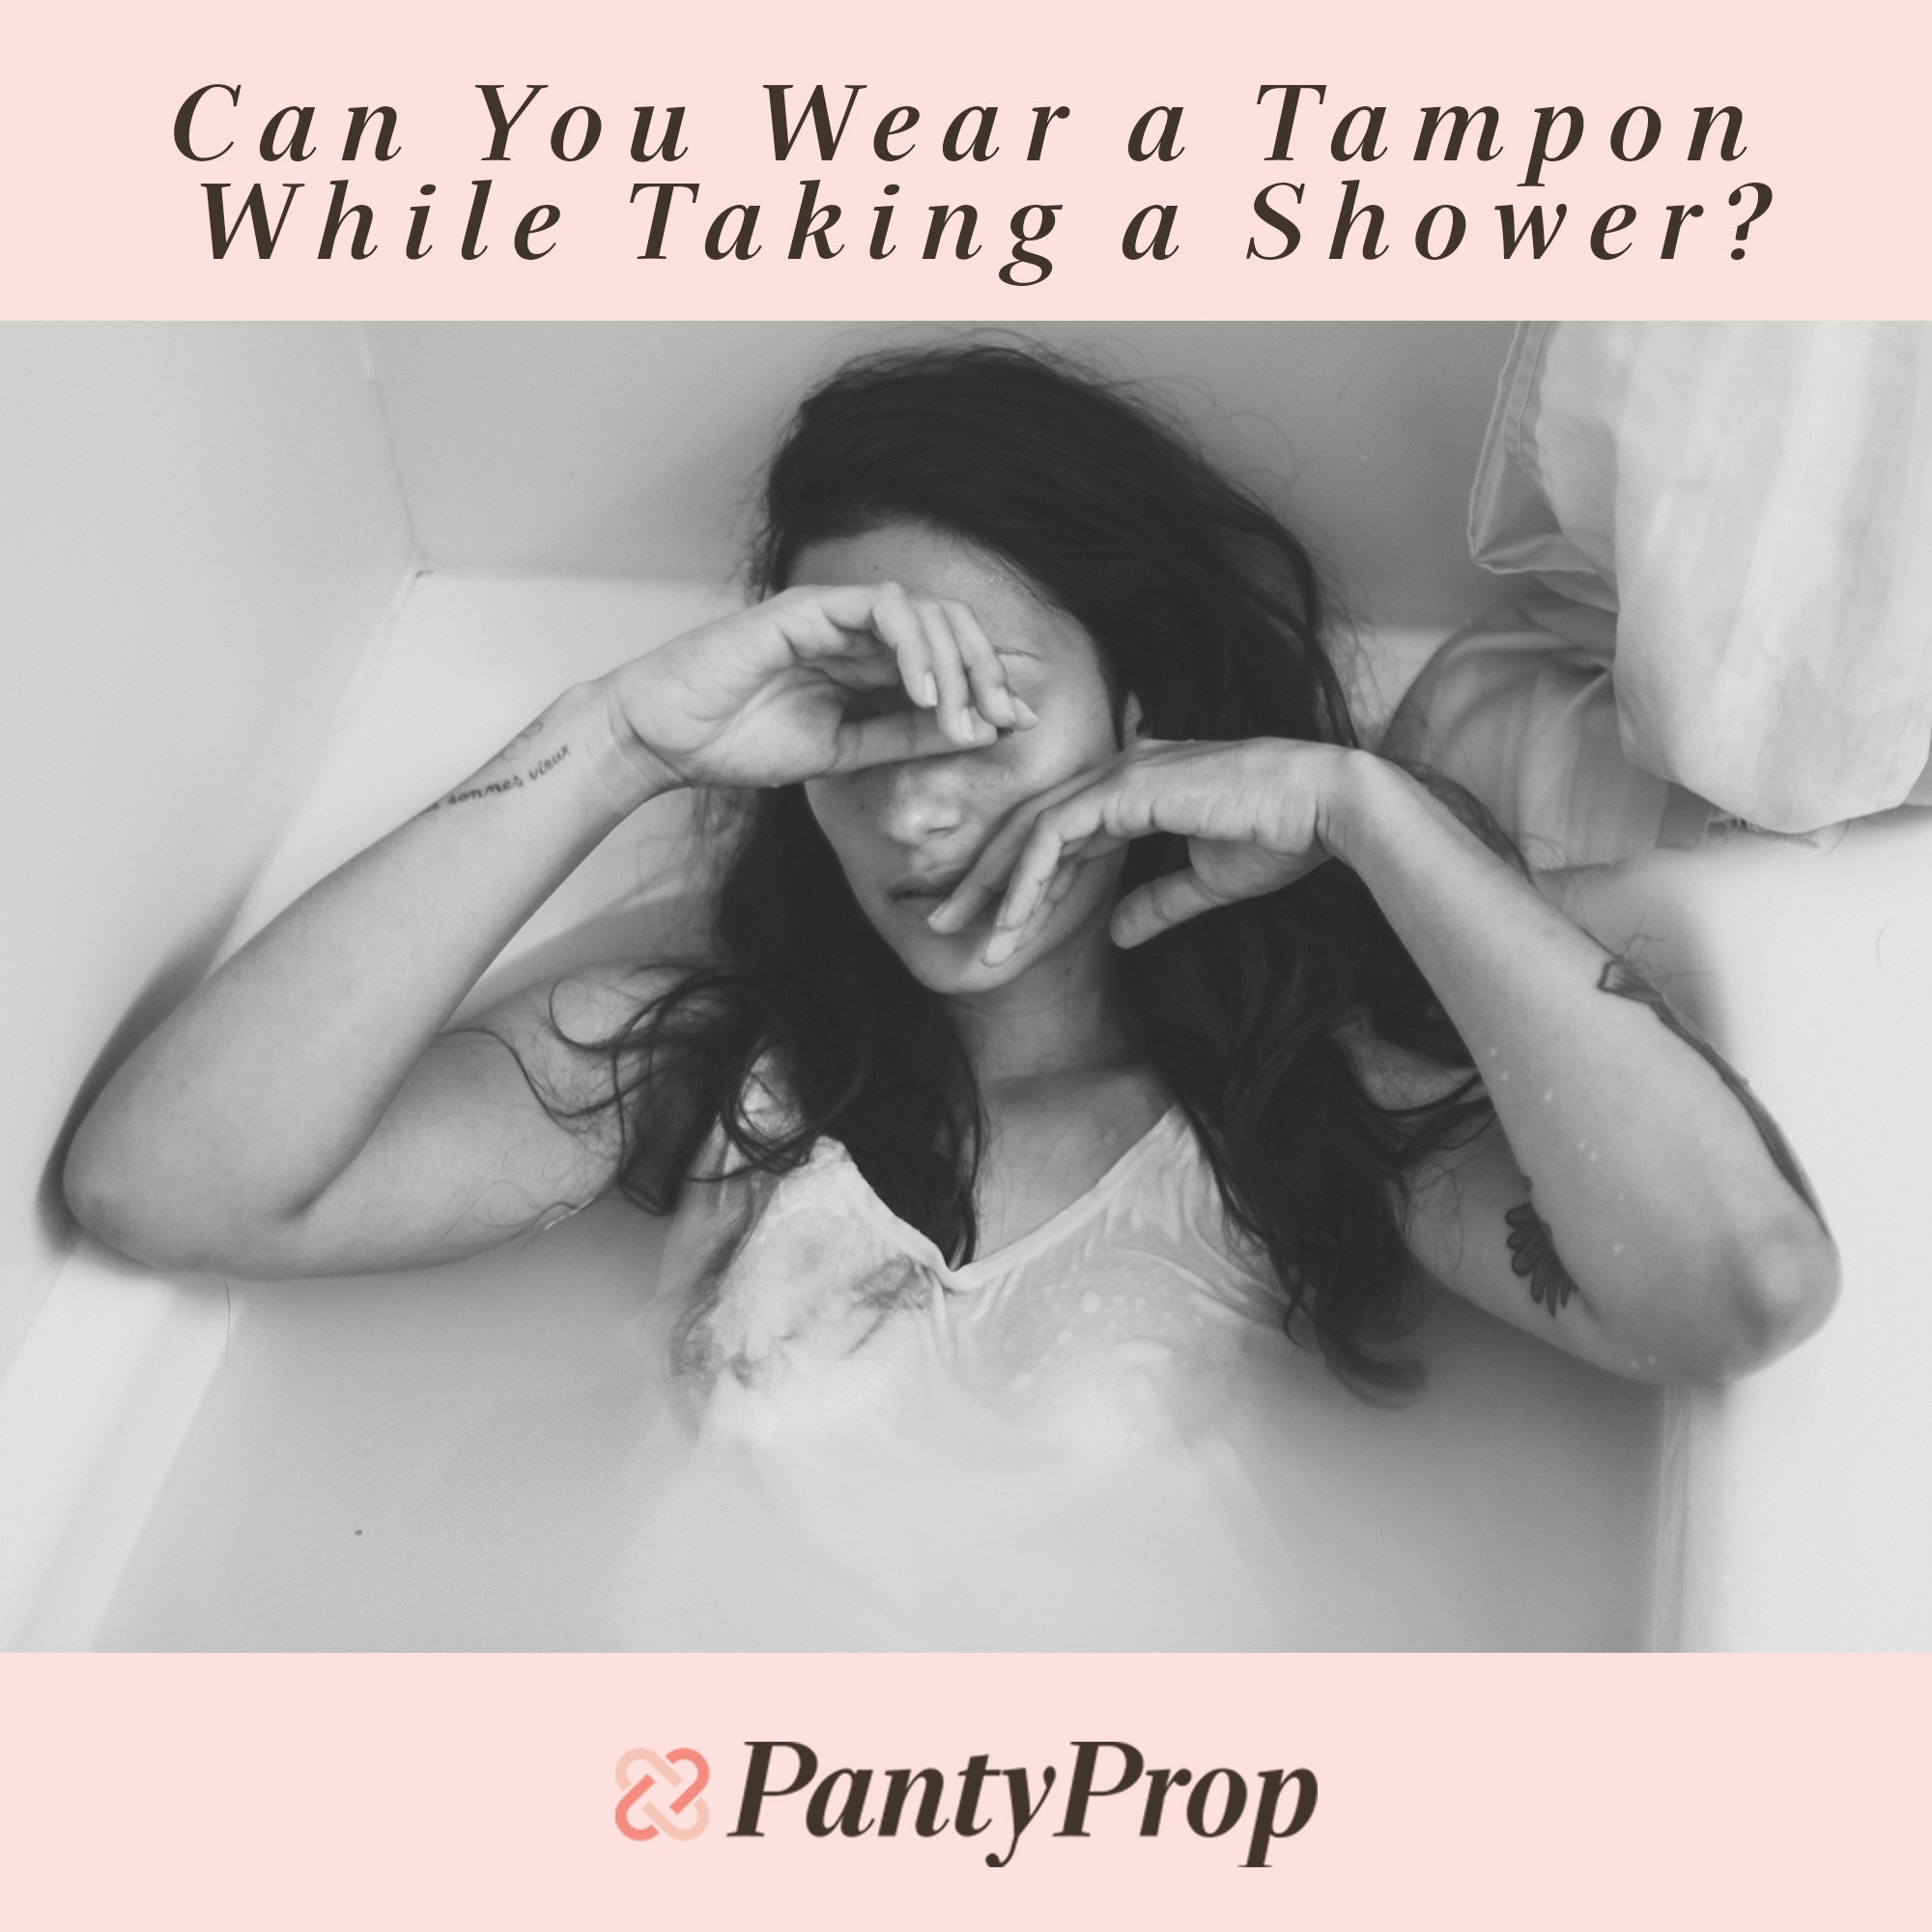 Can You Wear a Tampon While Taking a Shower?